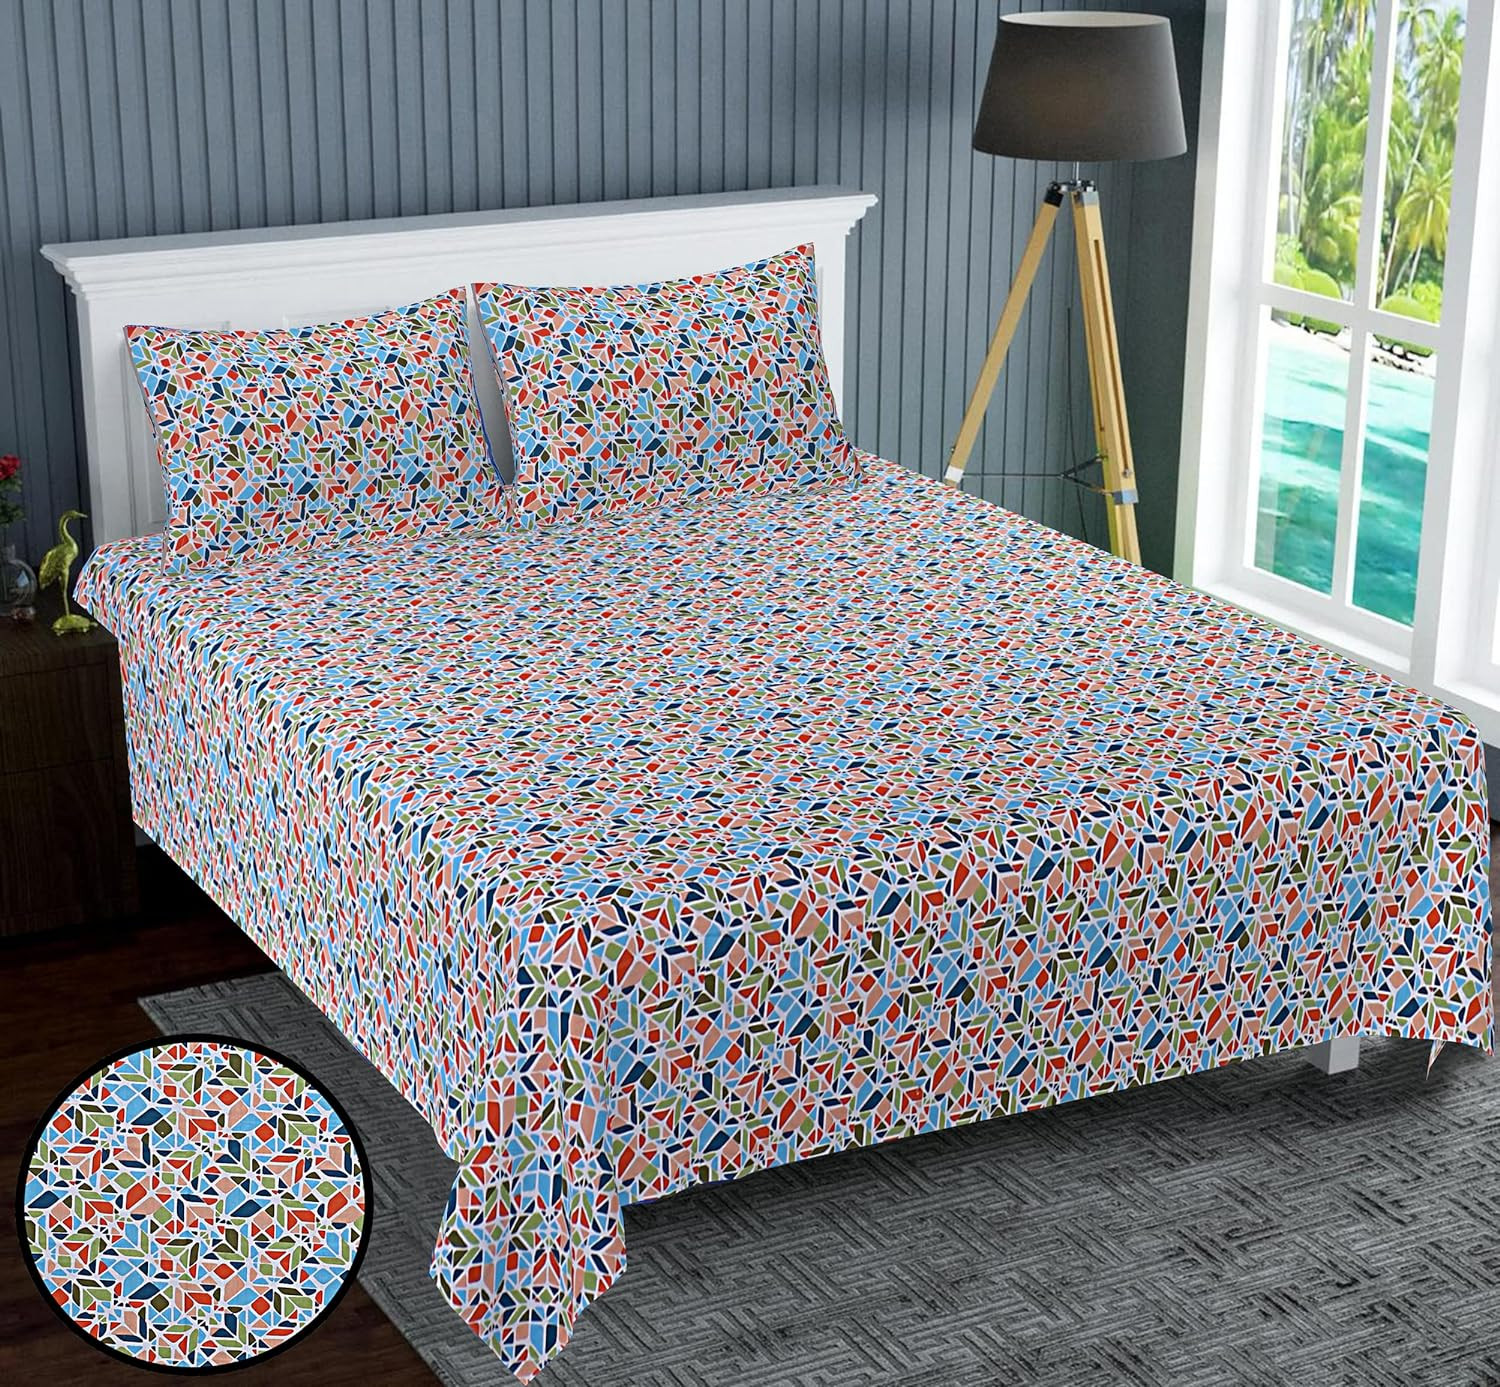 Kuber Industries Double Bedsheet(228*254 cm)|Cotton 120 TC Luxury Printed Soft & Lightweight Bedsheet for Double Bed with 2 Pillow Covers (Multicolor)